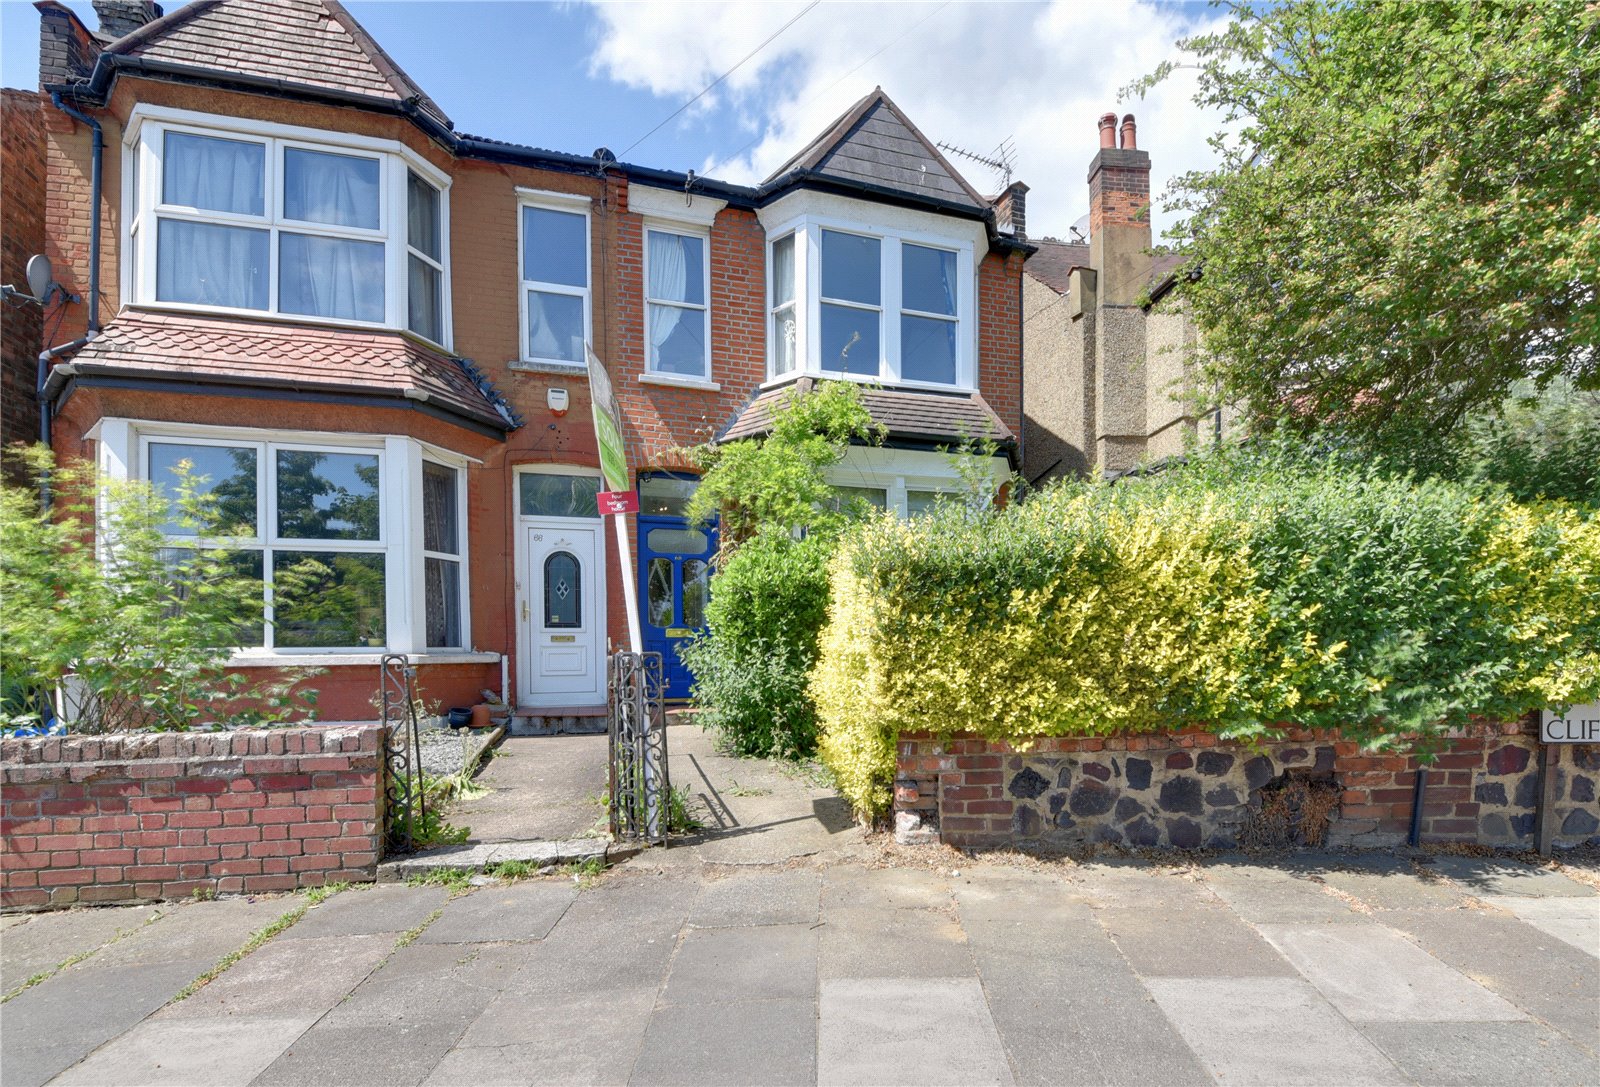 4 bed house for sale in Clifton Road, Finchley  - Property Image 1